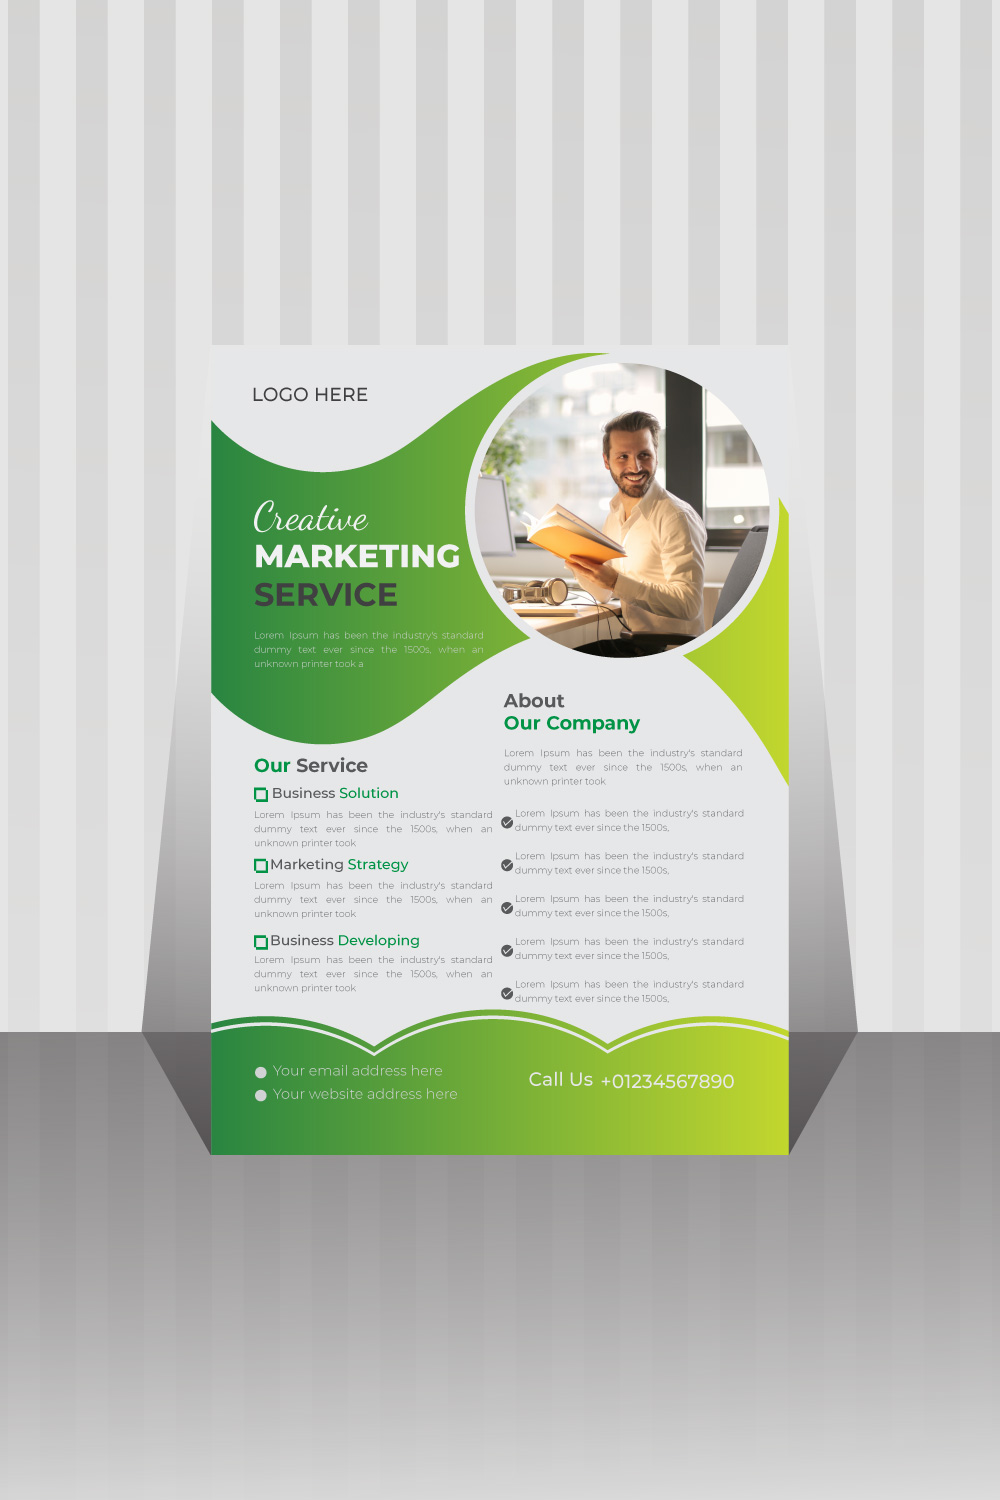 Image of a corporate business flyer with a marvelous design design